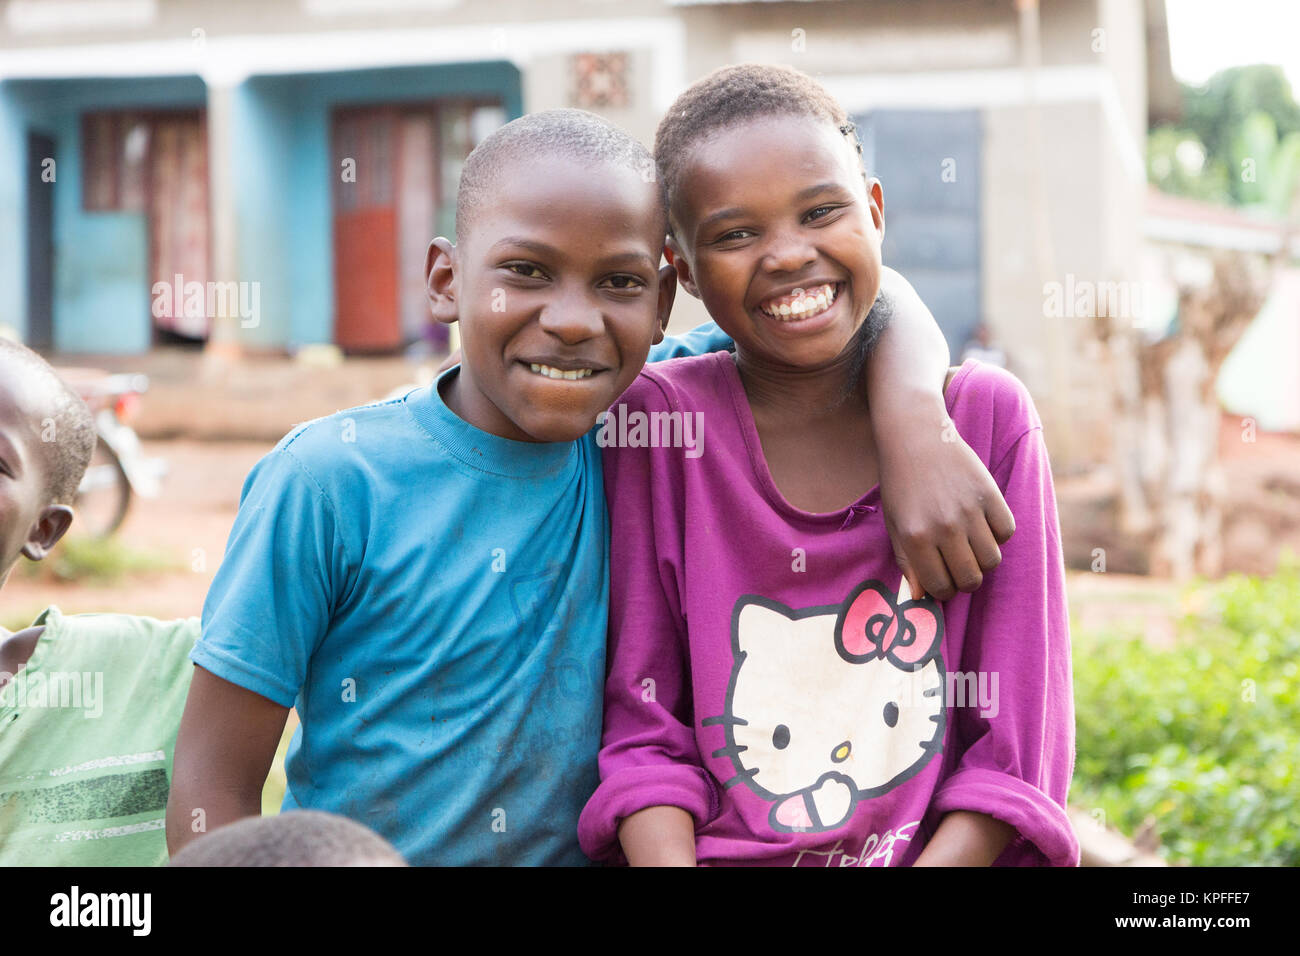 Lugazi, Uganda. June 18 2017. Two laughing Ugandan children - a boy and a girl - perhaps a brother and a sister. Stock Photo